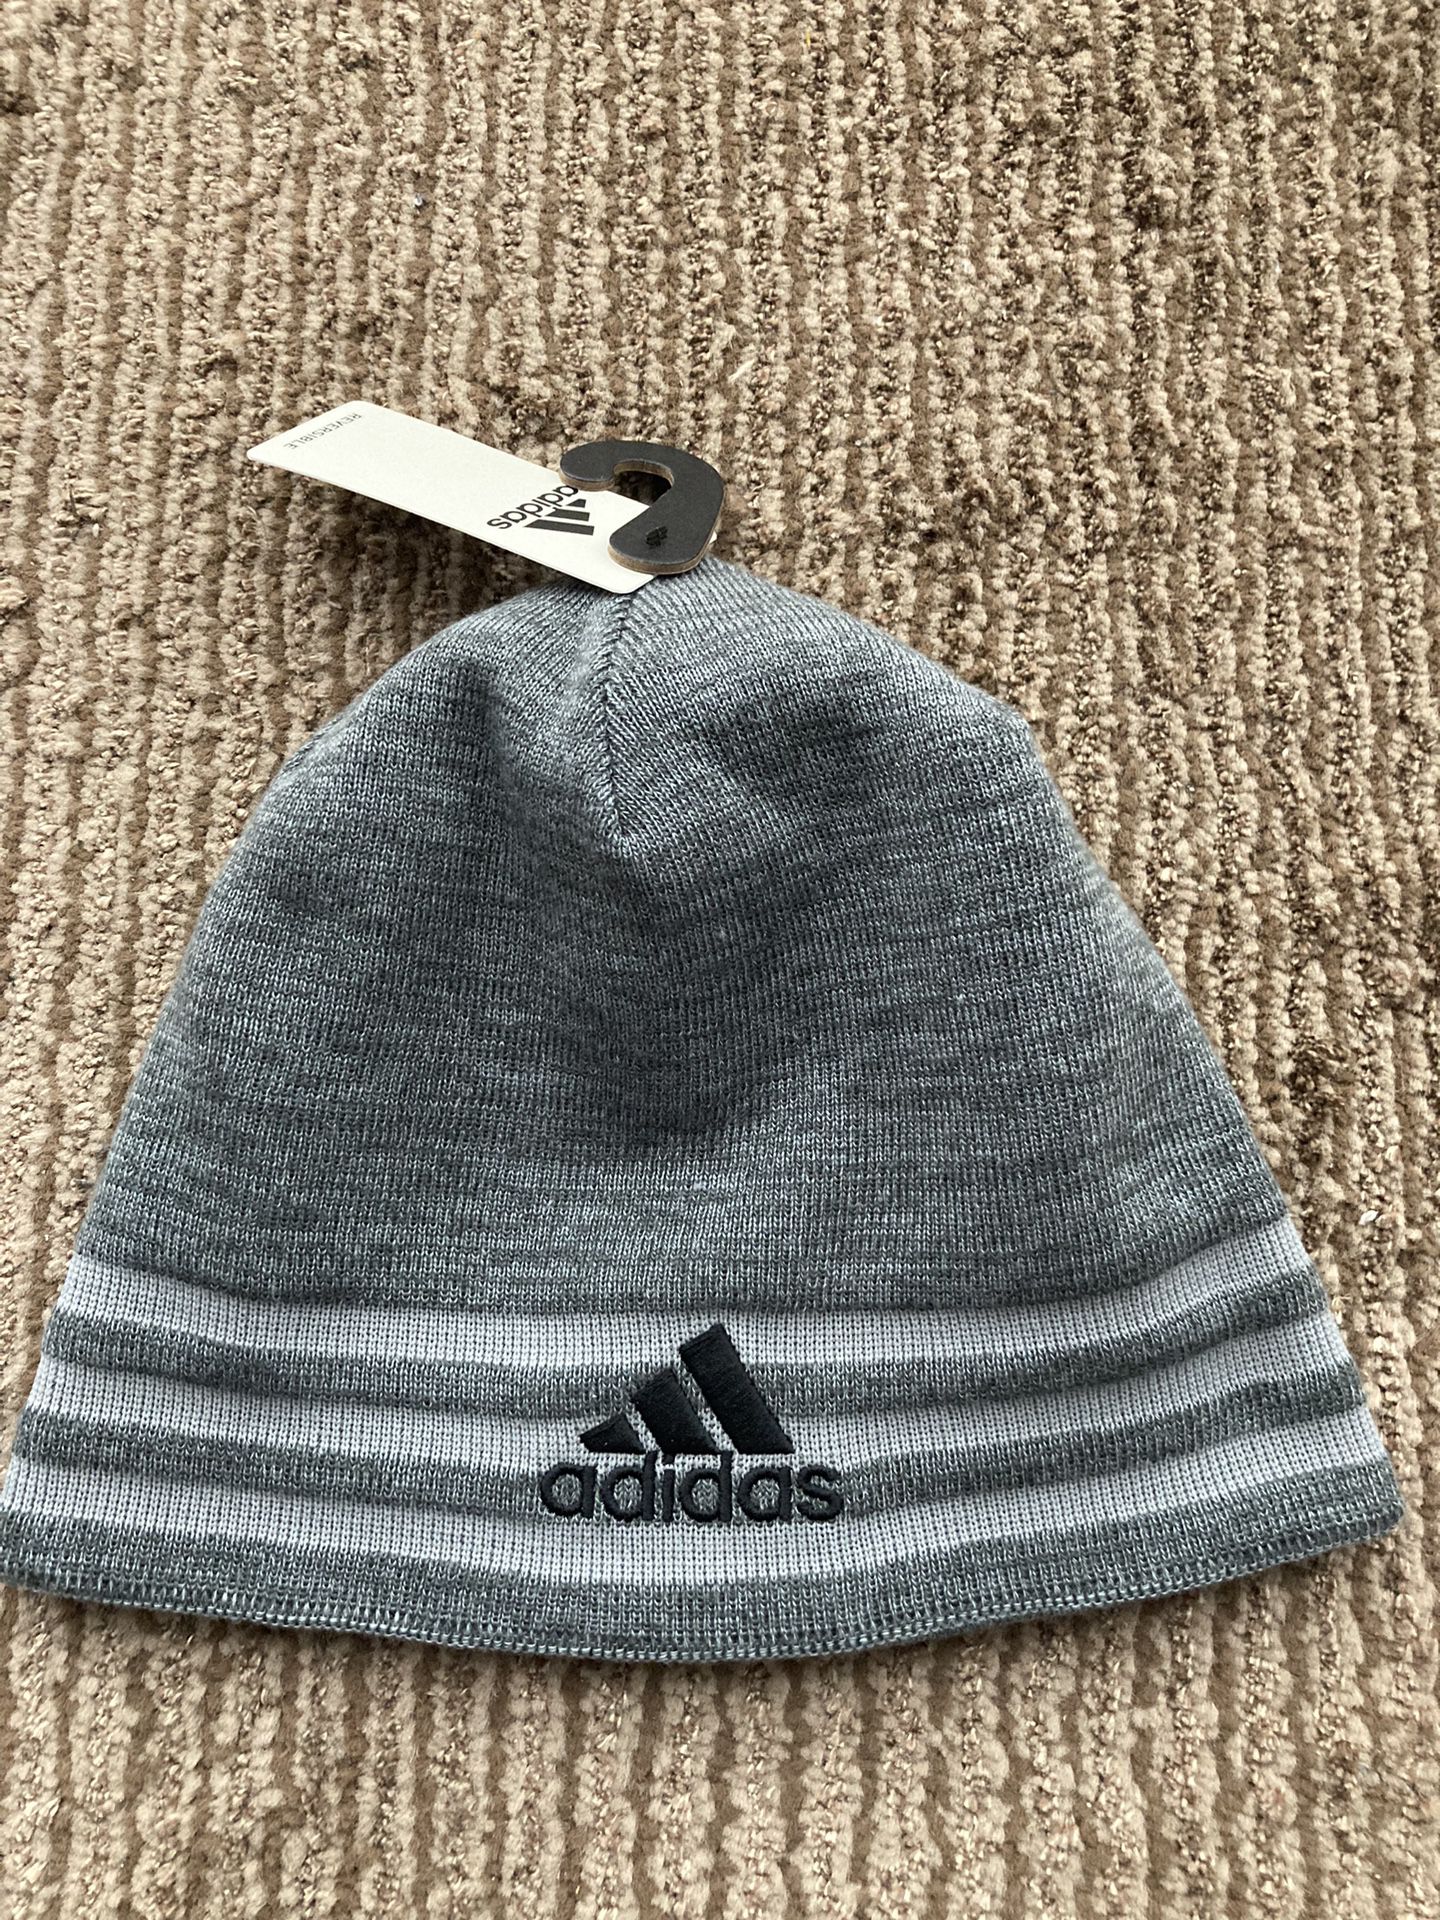 **For Sale BRAND NEW Adidas Eclipse Reversible Beanie